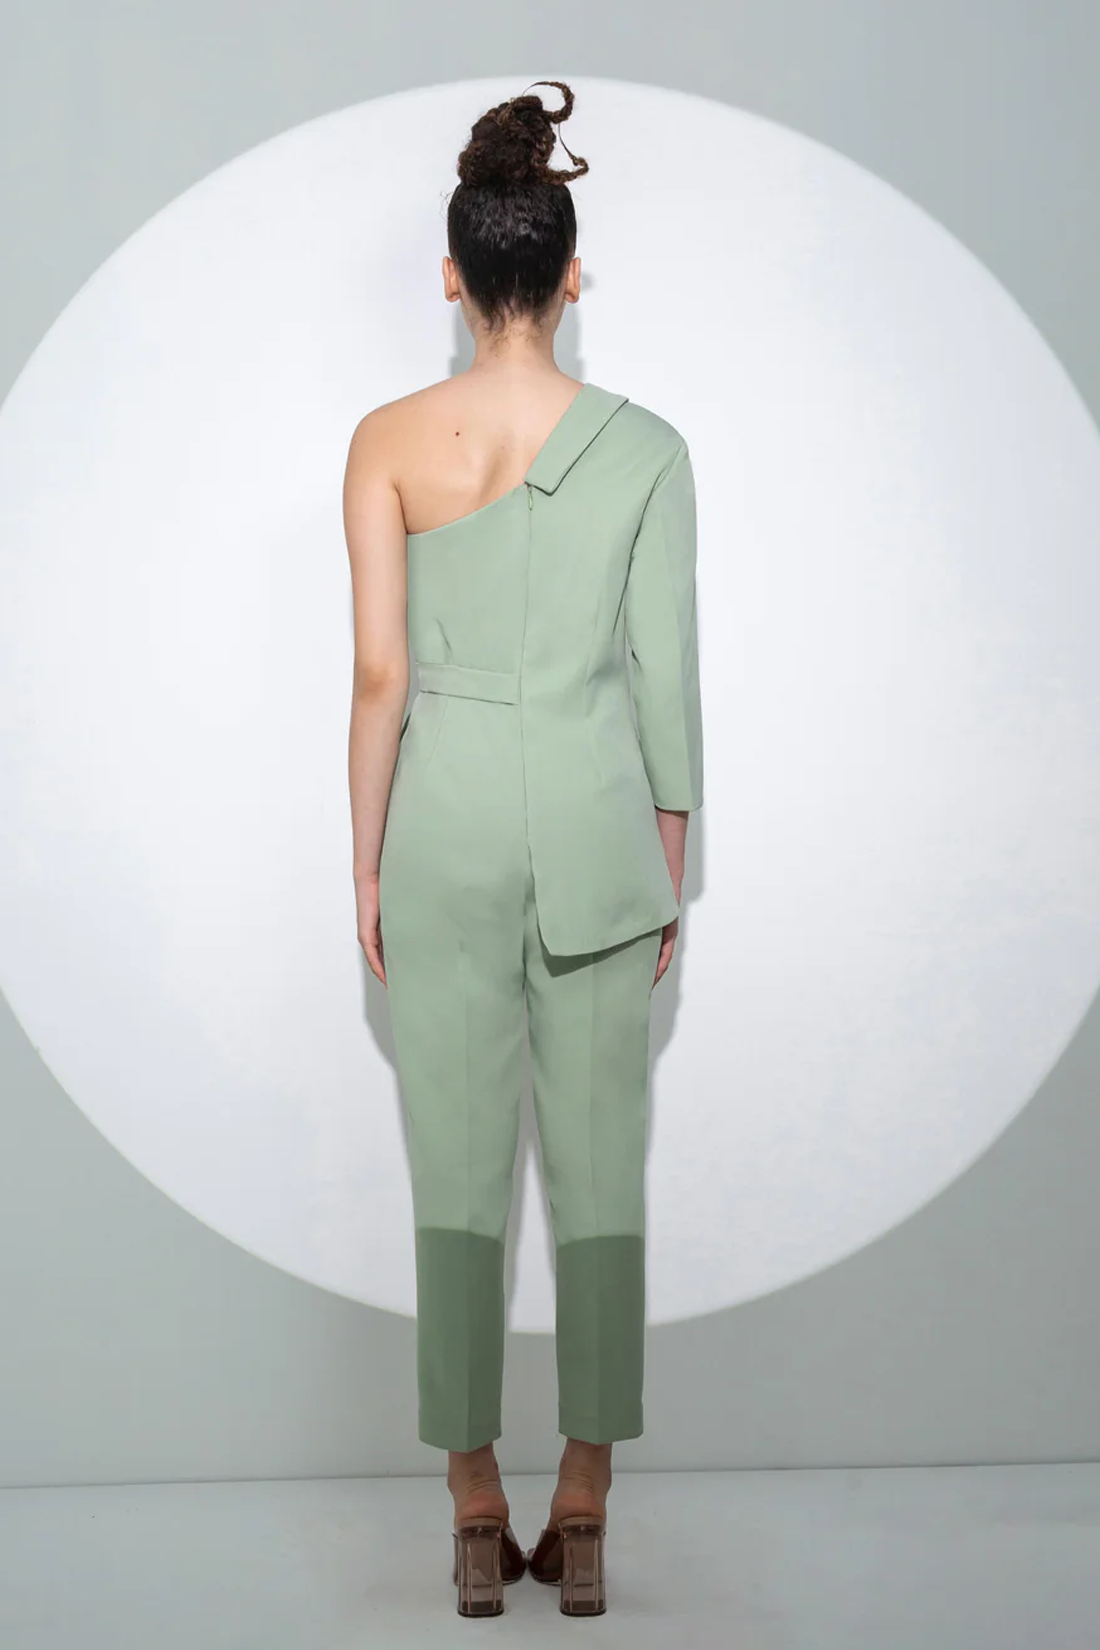 Thumbnail preview #3 for Half and Half Jumpsuit